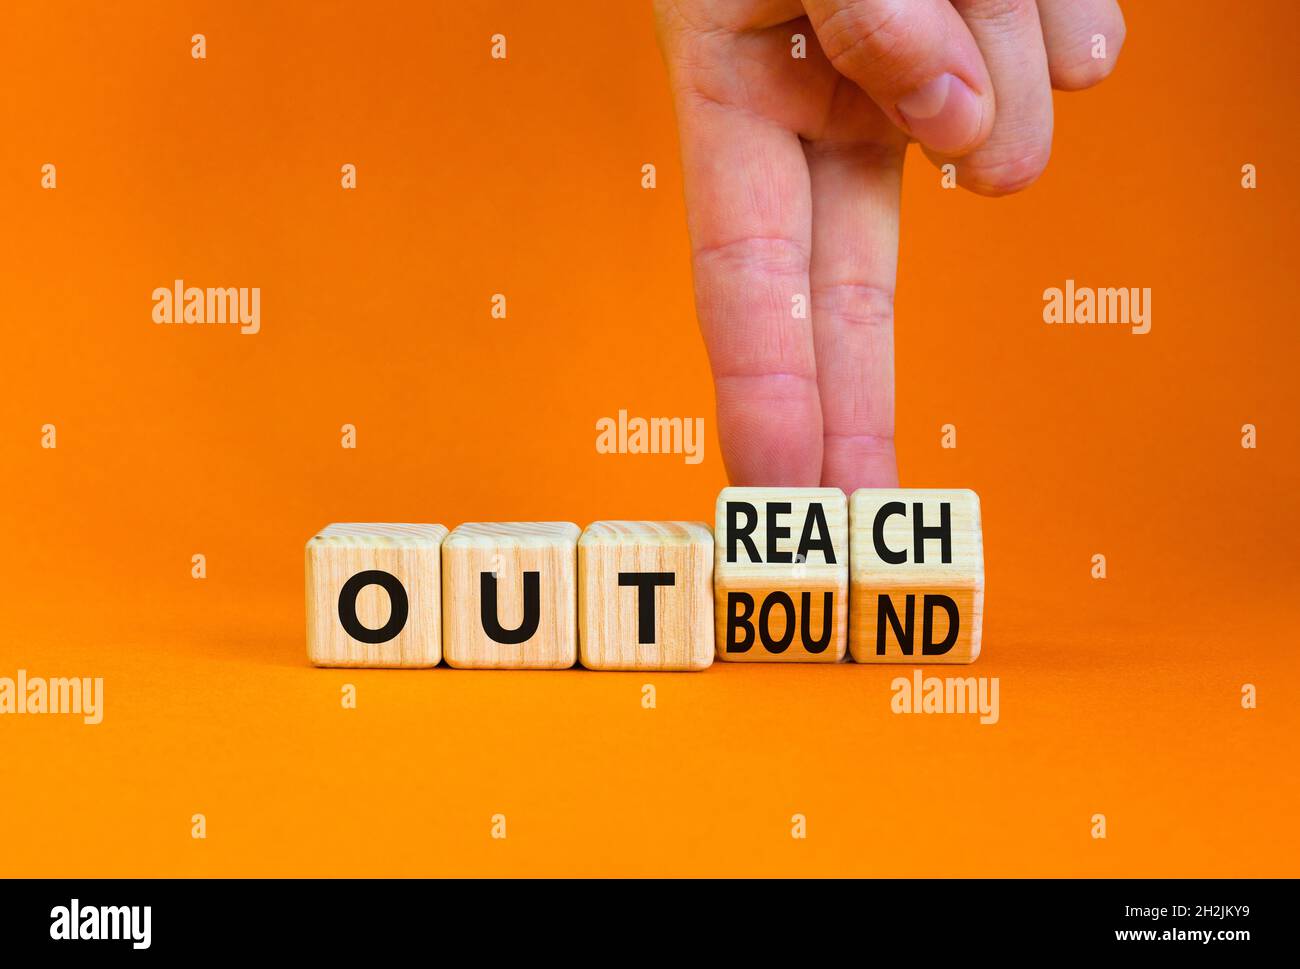 Outreach or outbound symbol. Businessman turns wooden cubes and changes the word 'outbound' to 'outreach'. Beautiful orange table orange background. B Stock Photo